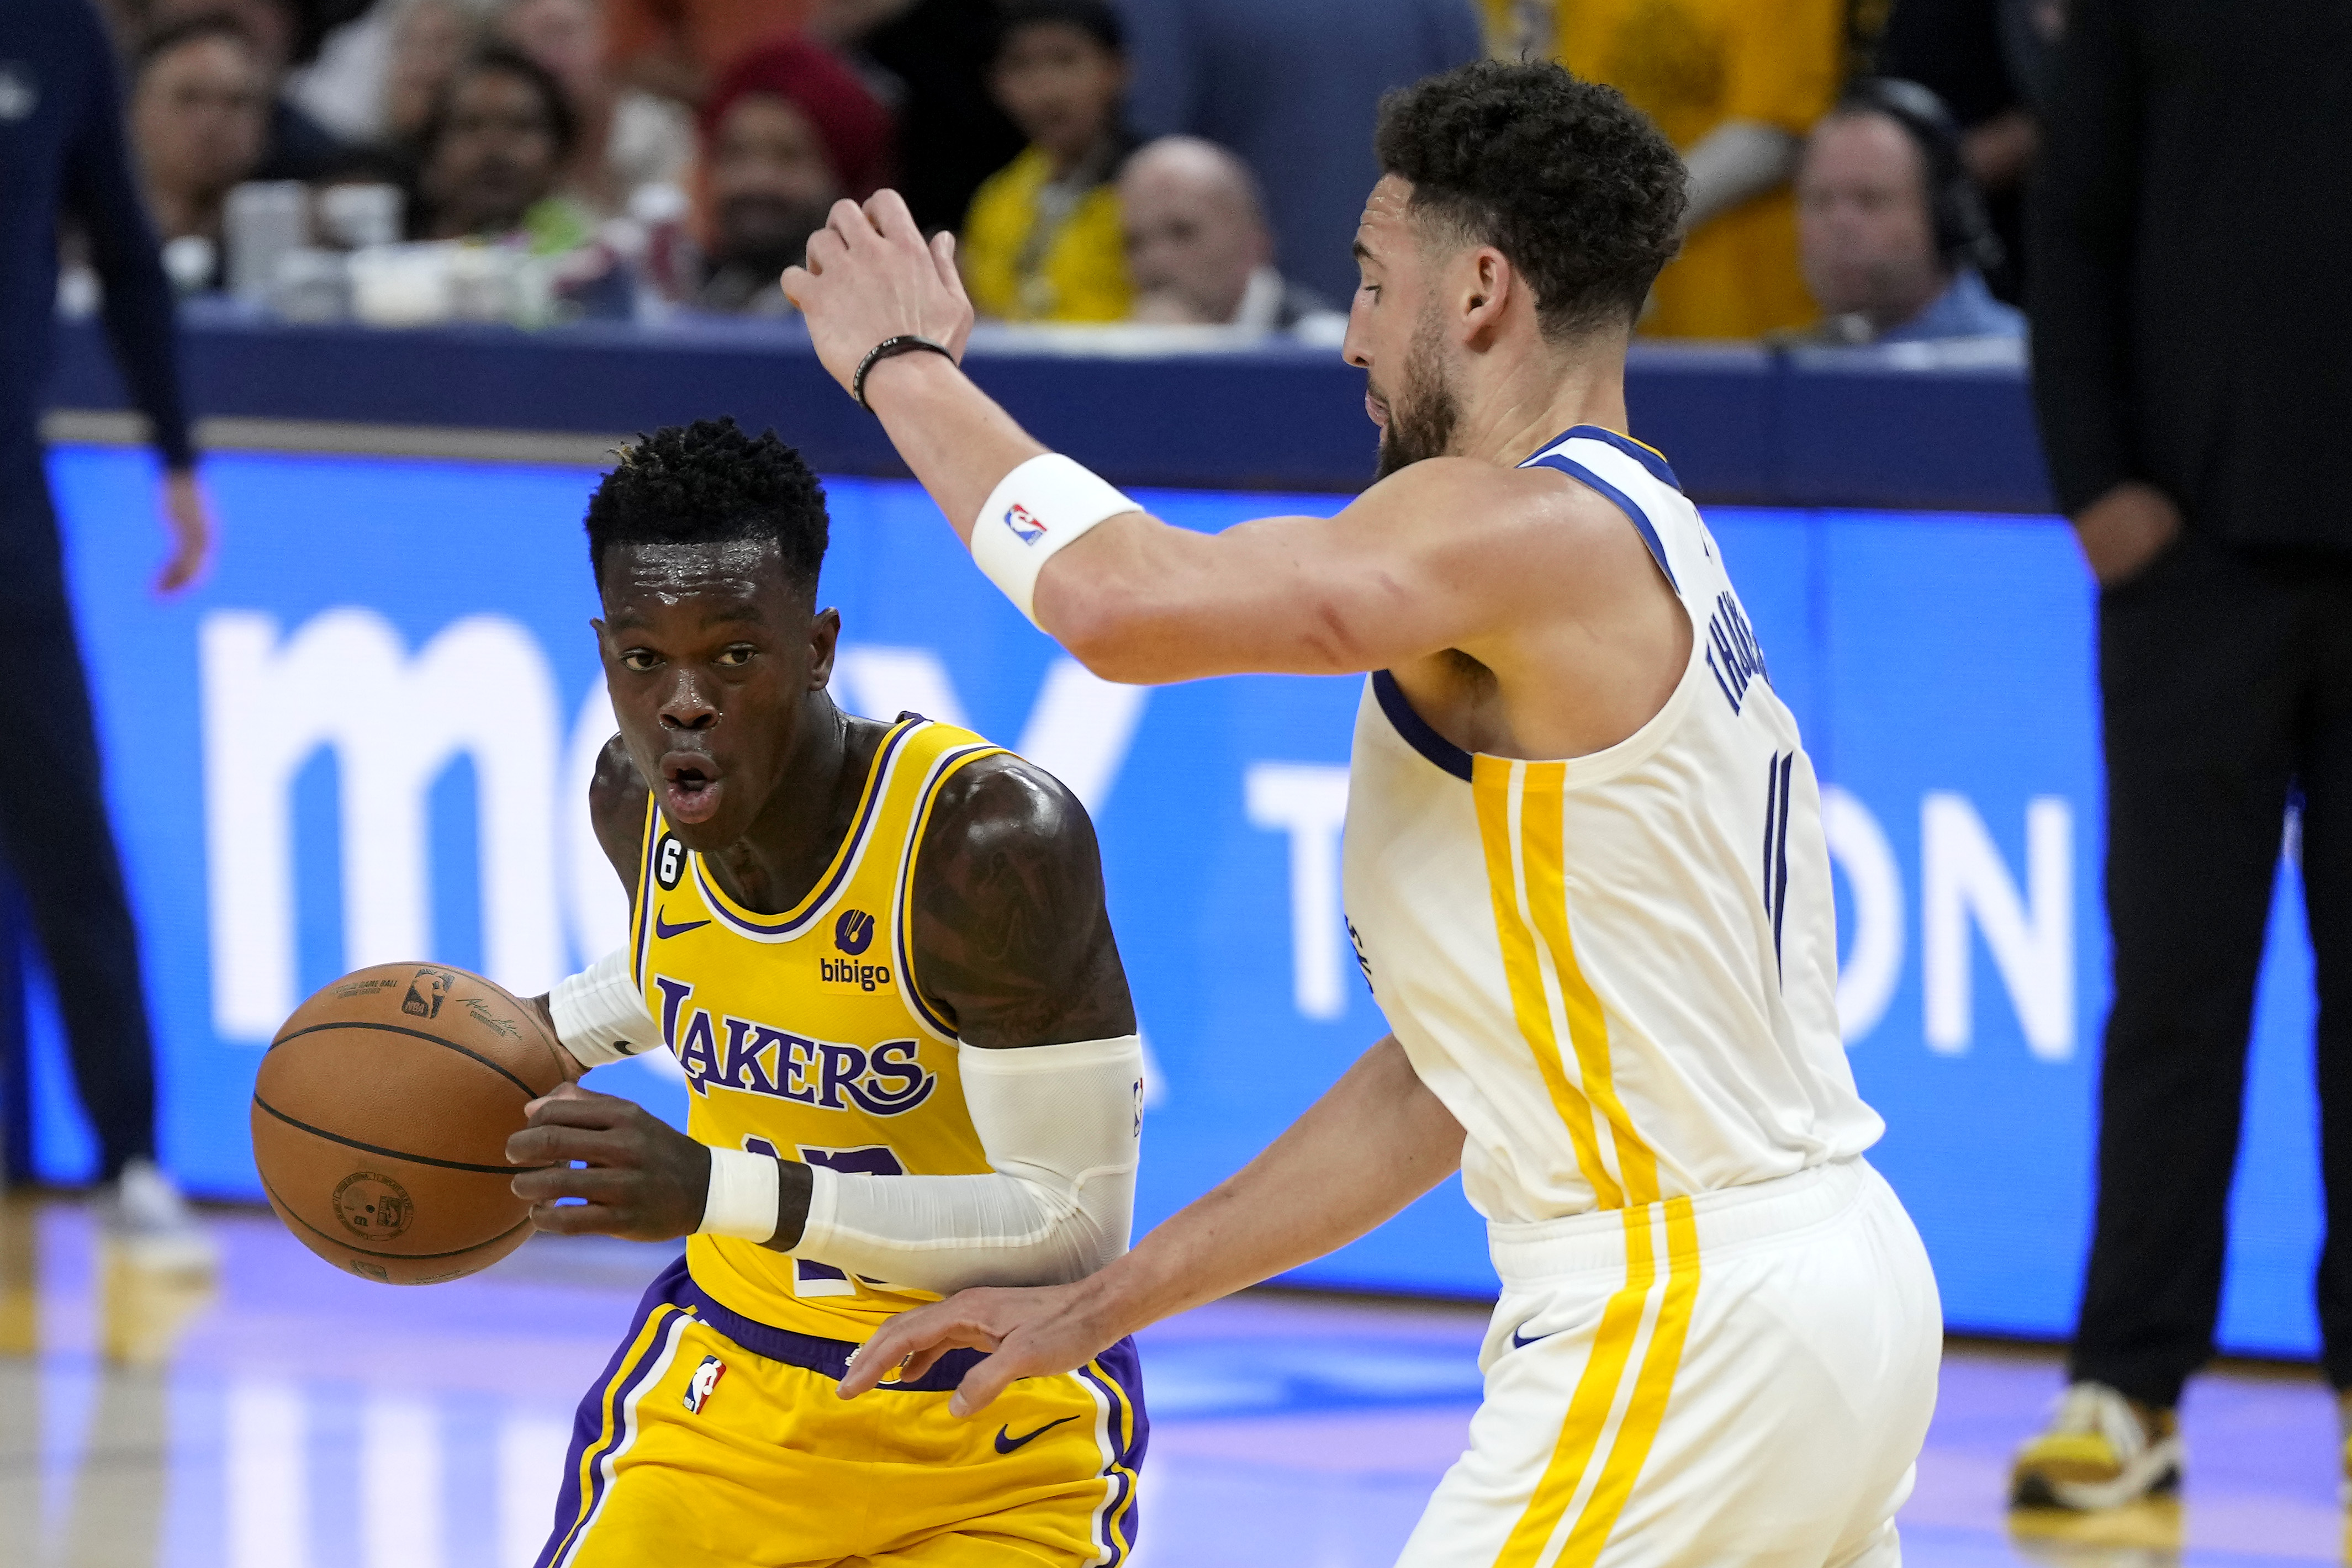 Los Angeles Lakers v Golden State Warriors - Game Five